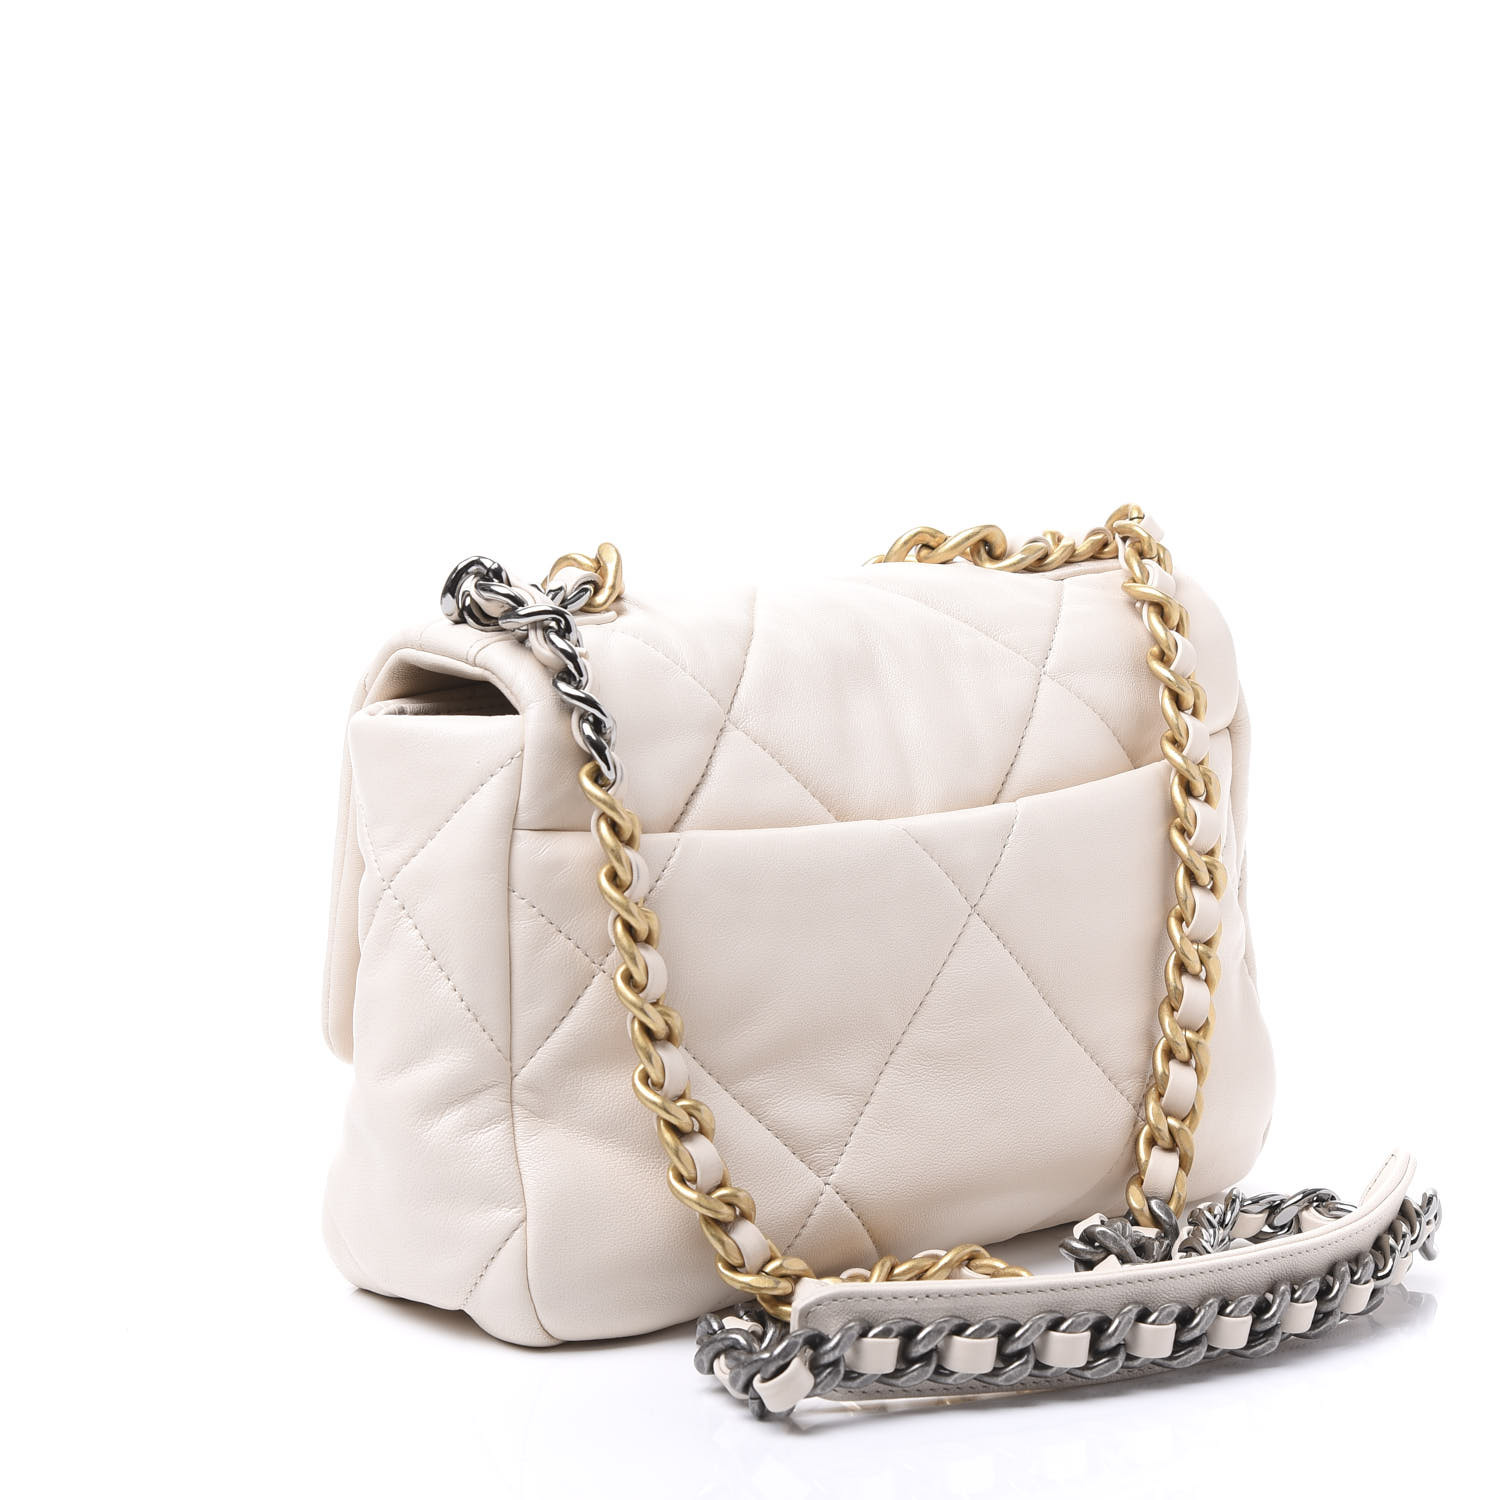 CHANEL Lambskin Quilted Medium Chanel 19 Flap White 556417